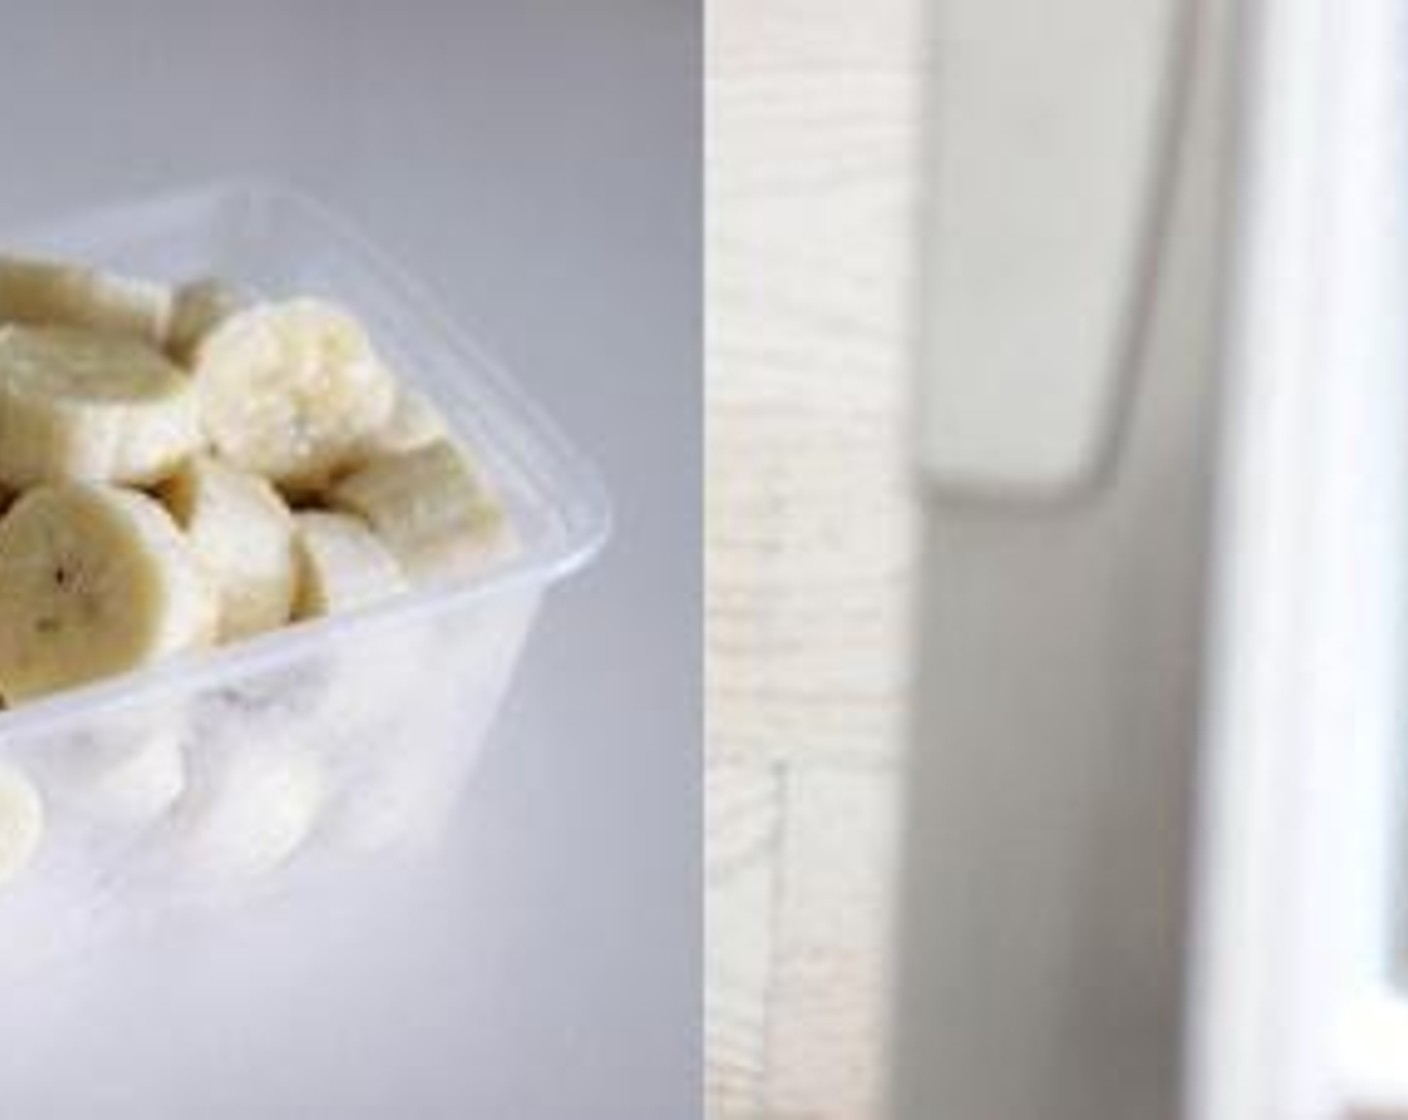 step 1 Cut the Banana (1) into small pieces and put them in a container, then rest it in a freezer overnight.